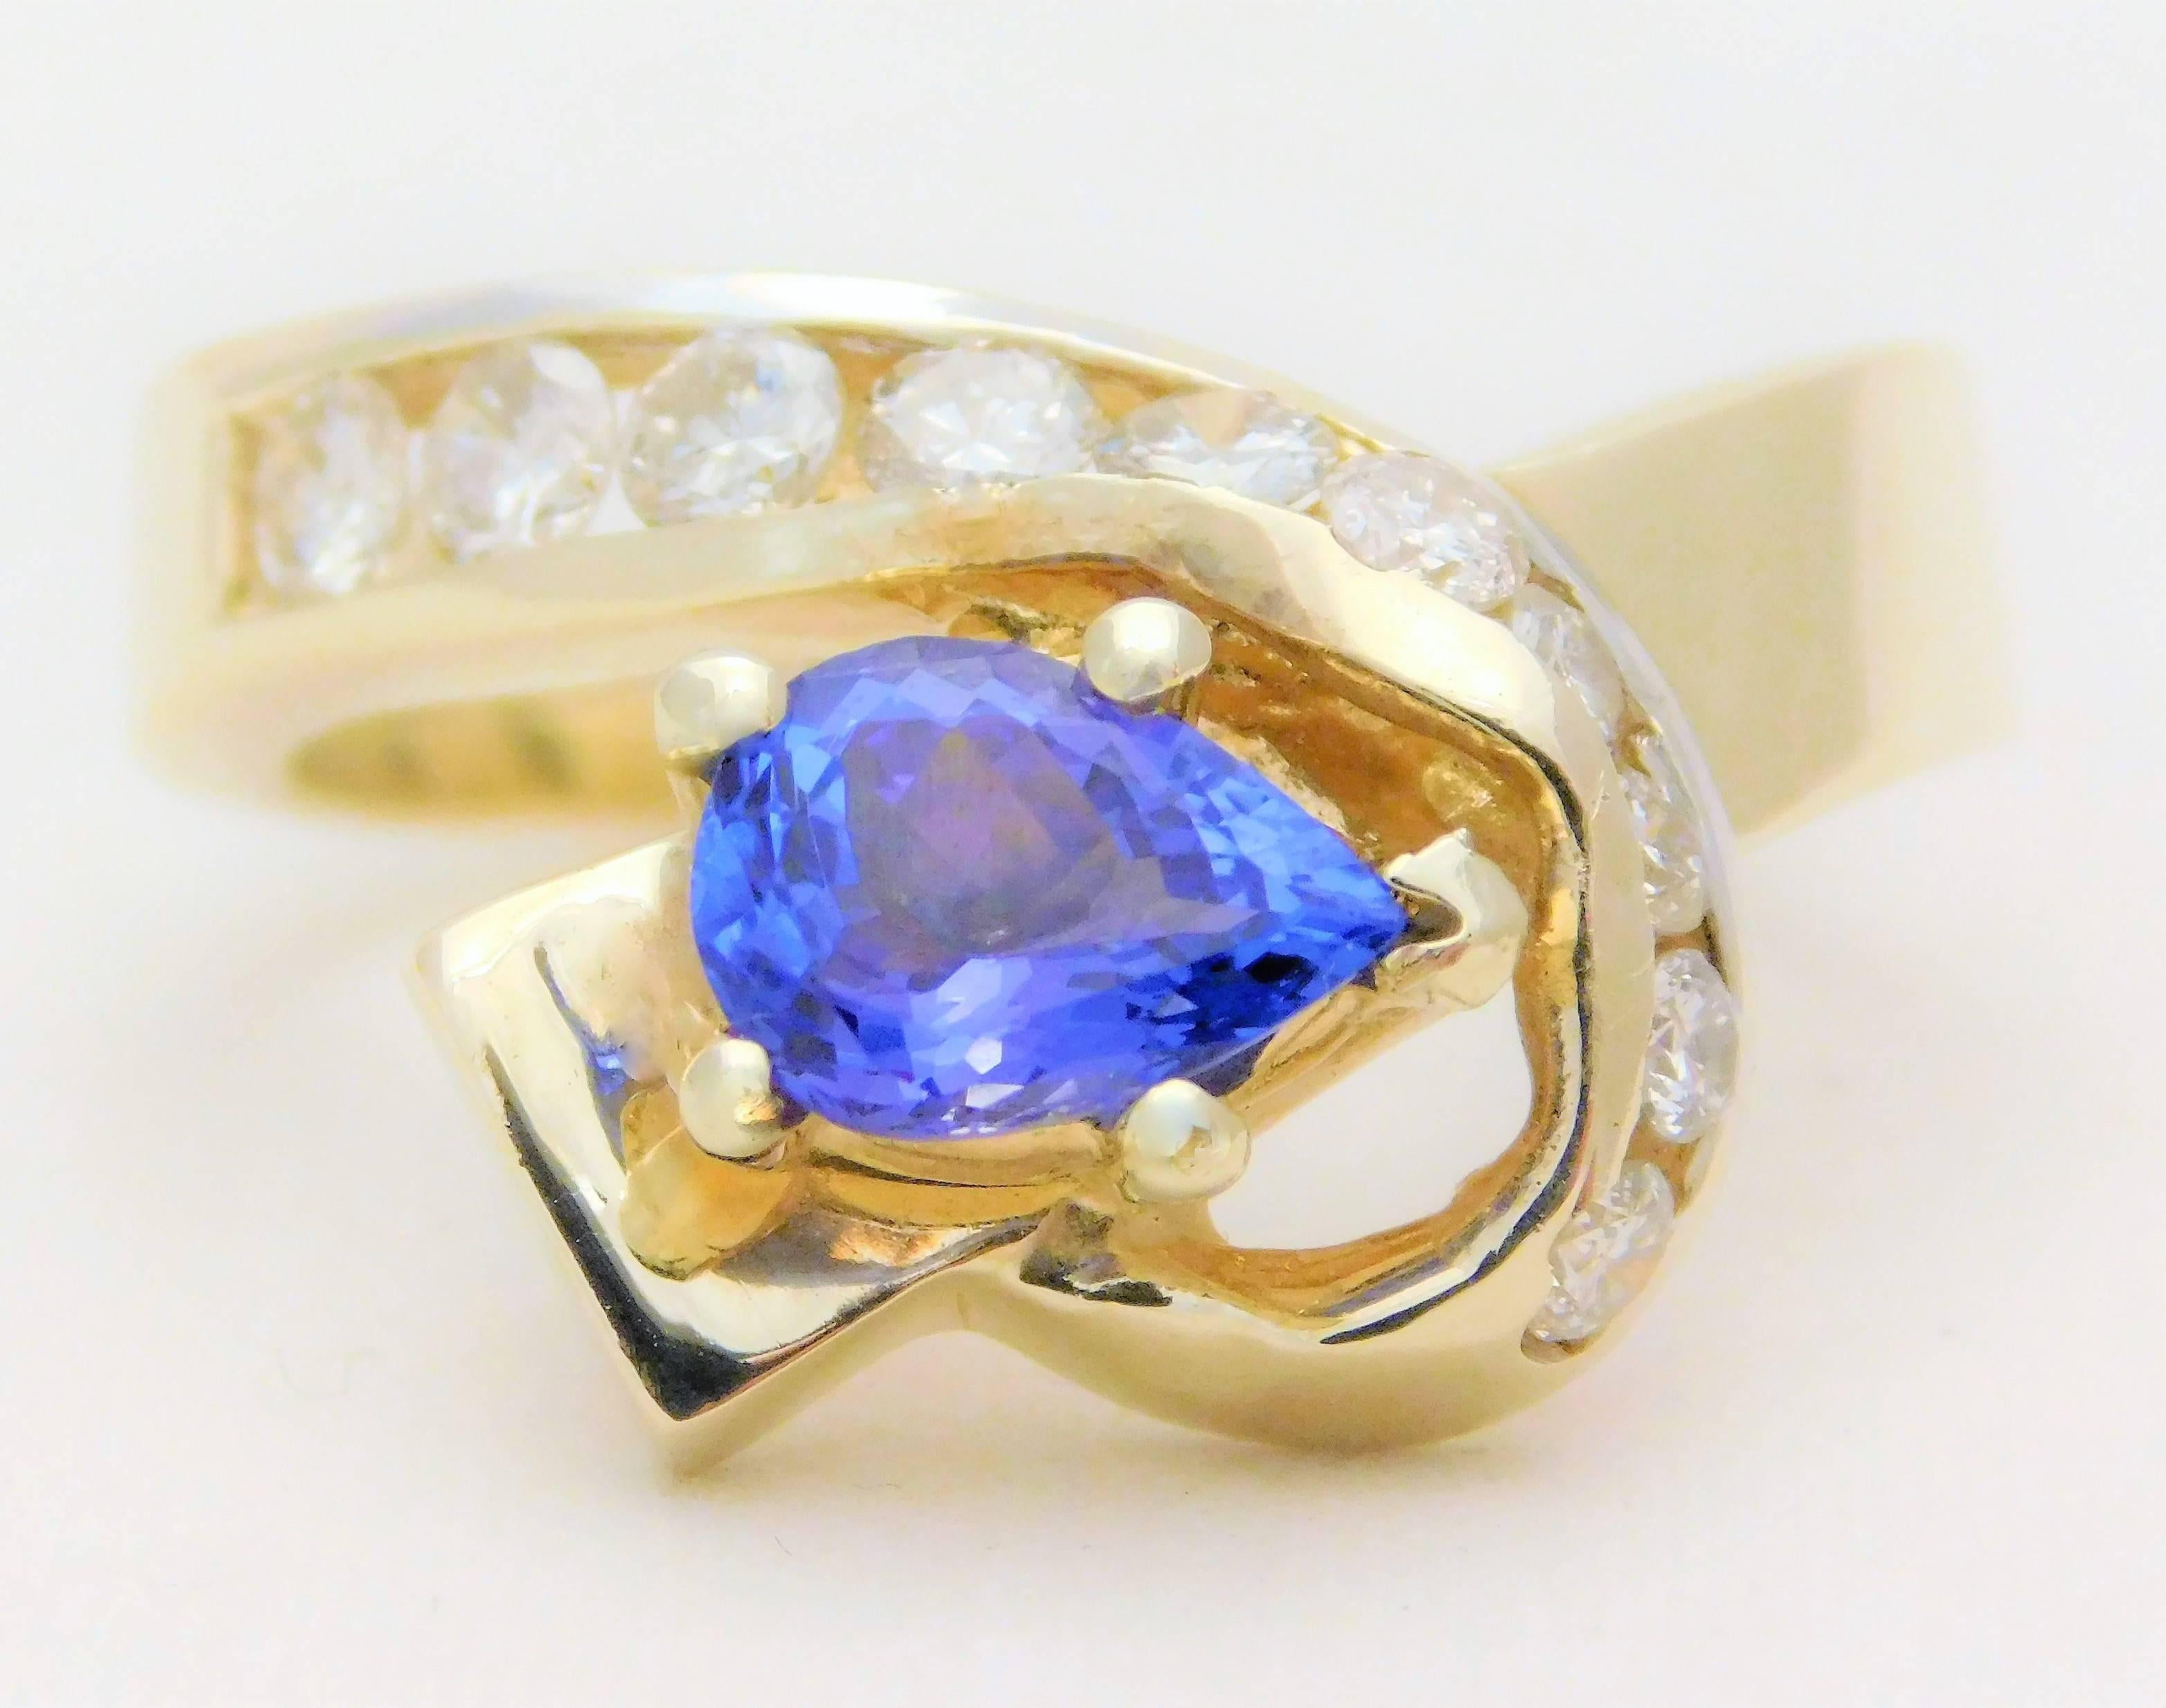 Vintage 2.05 Carat Pear-Cut Tanzanite and Diamond Cocktail Ring For Sale 2